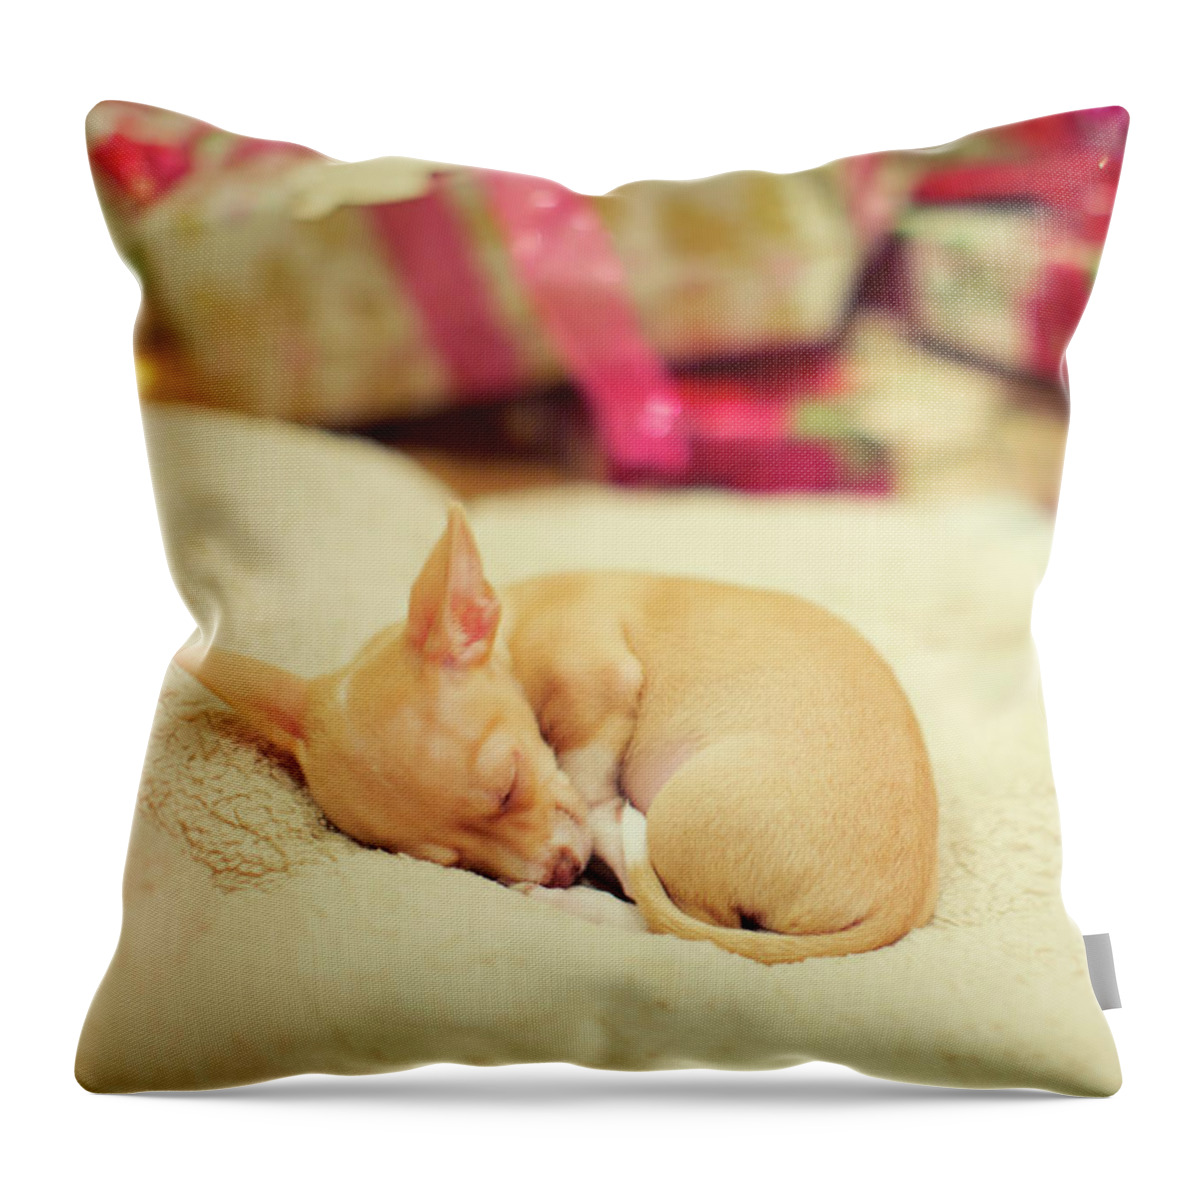 Mr Pickles Throw Pillow featuring the photograph Chihuahua Puppy Christmas Dreams by Susan Gary